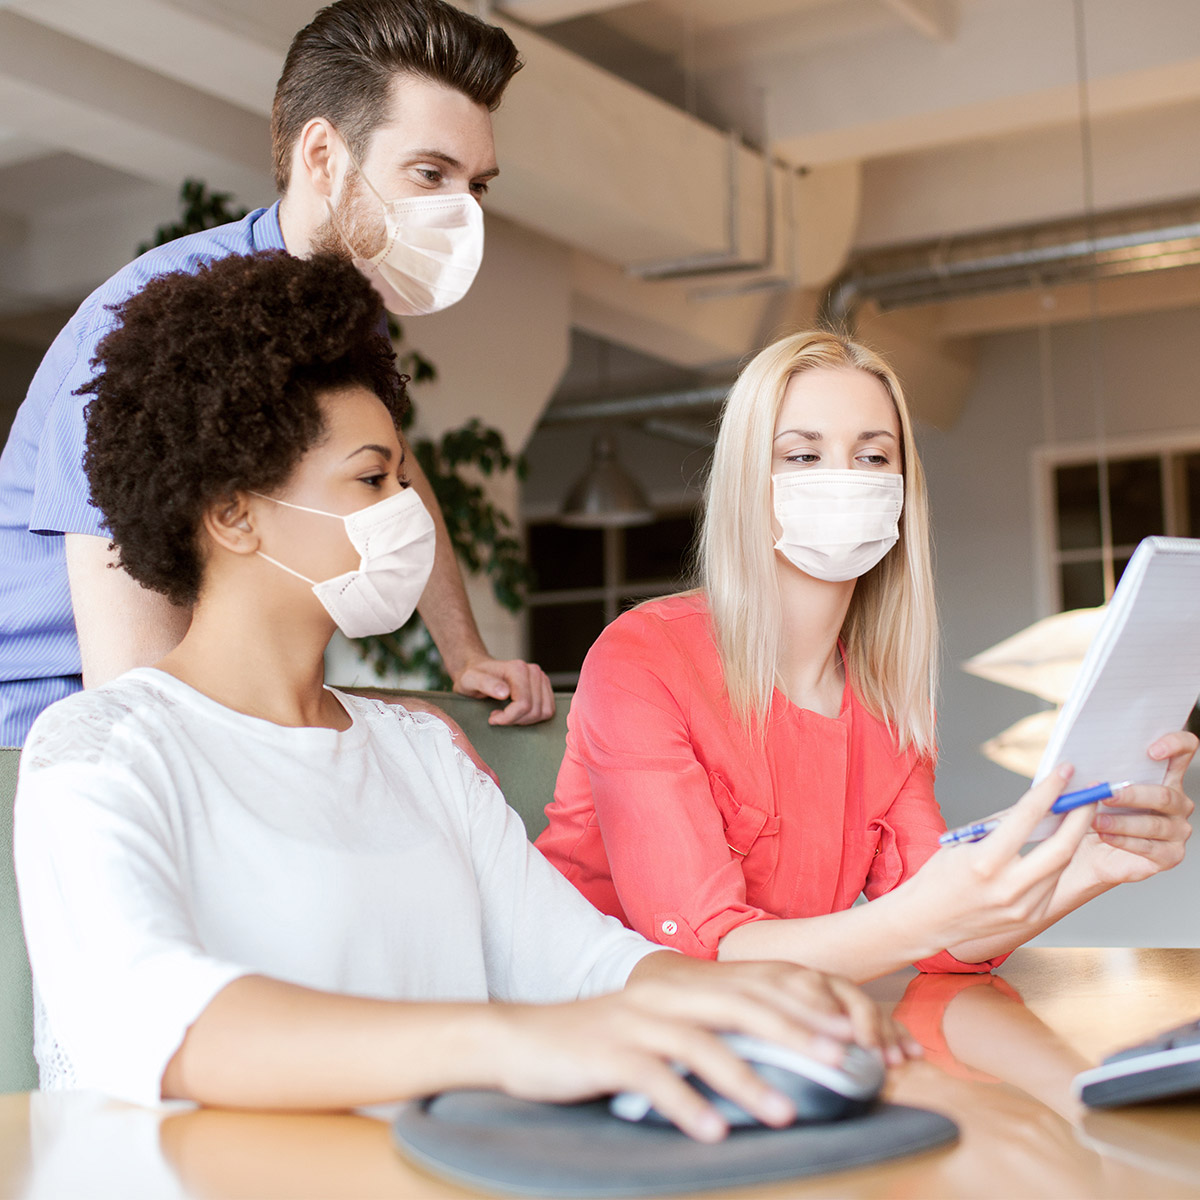 3 people wearing masks look at a tablet while using a computer.